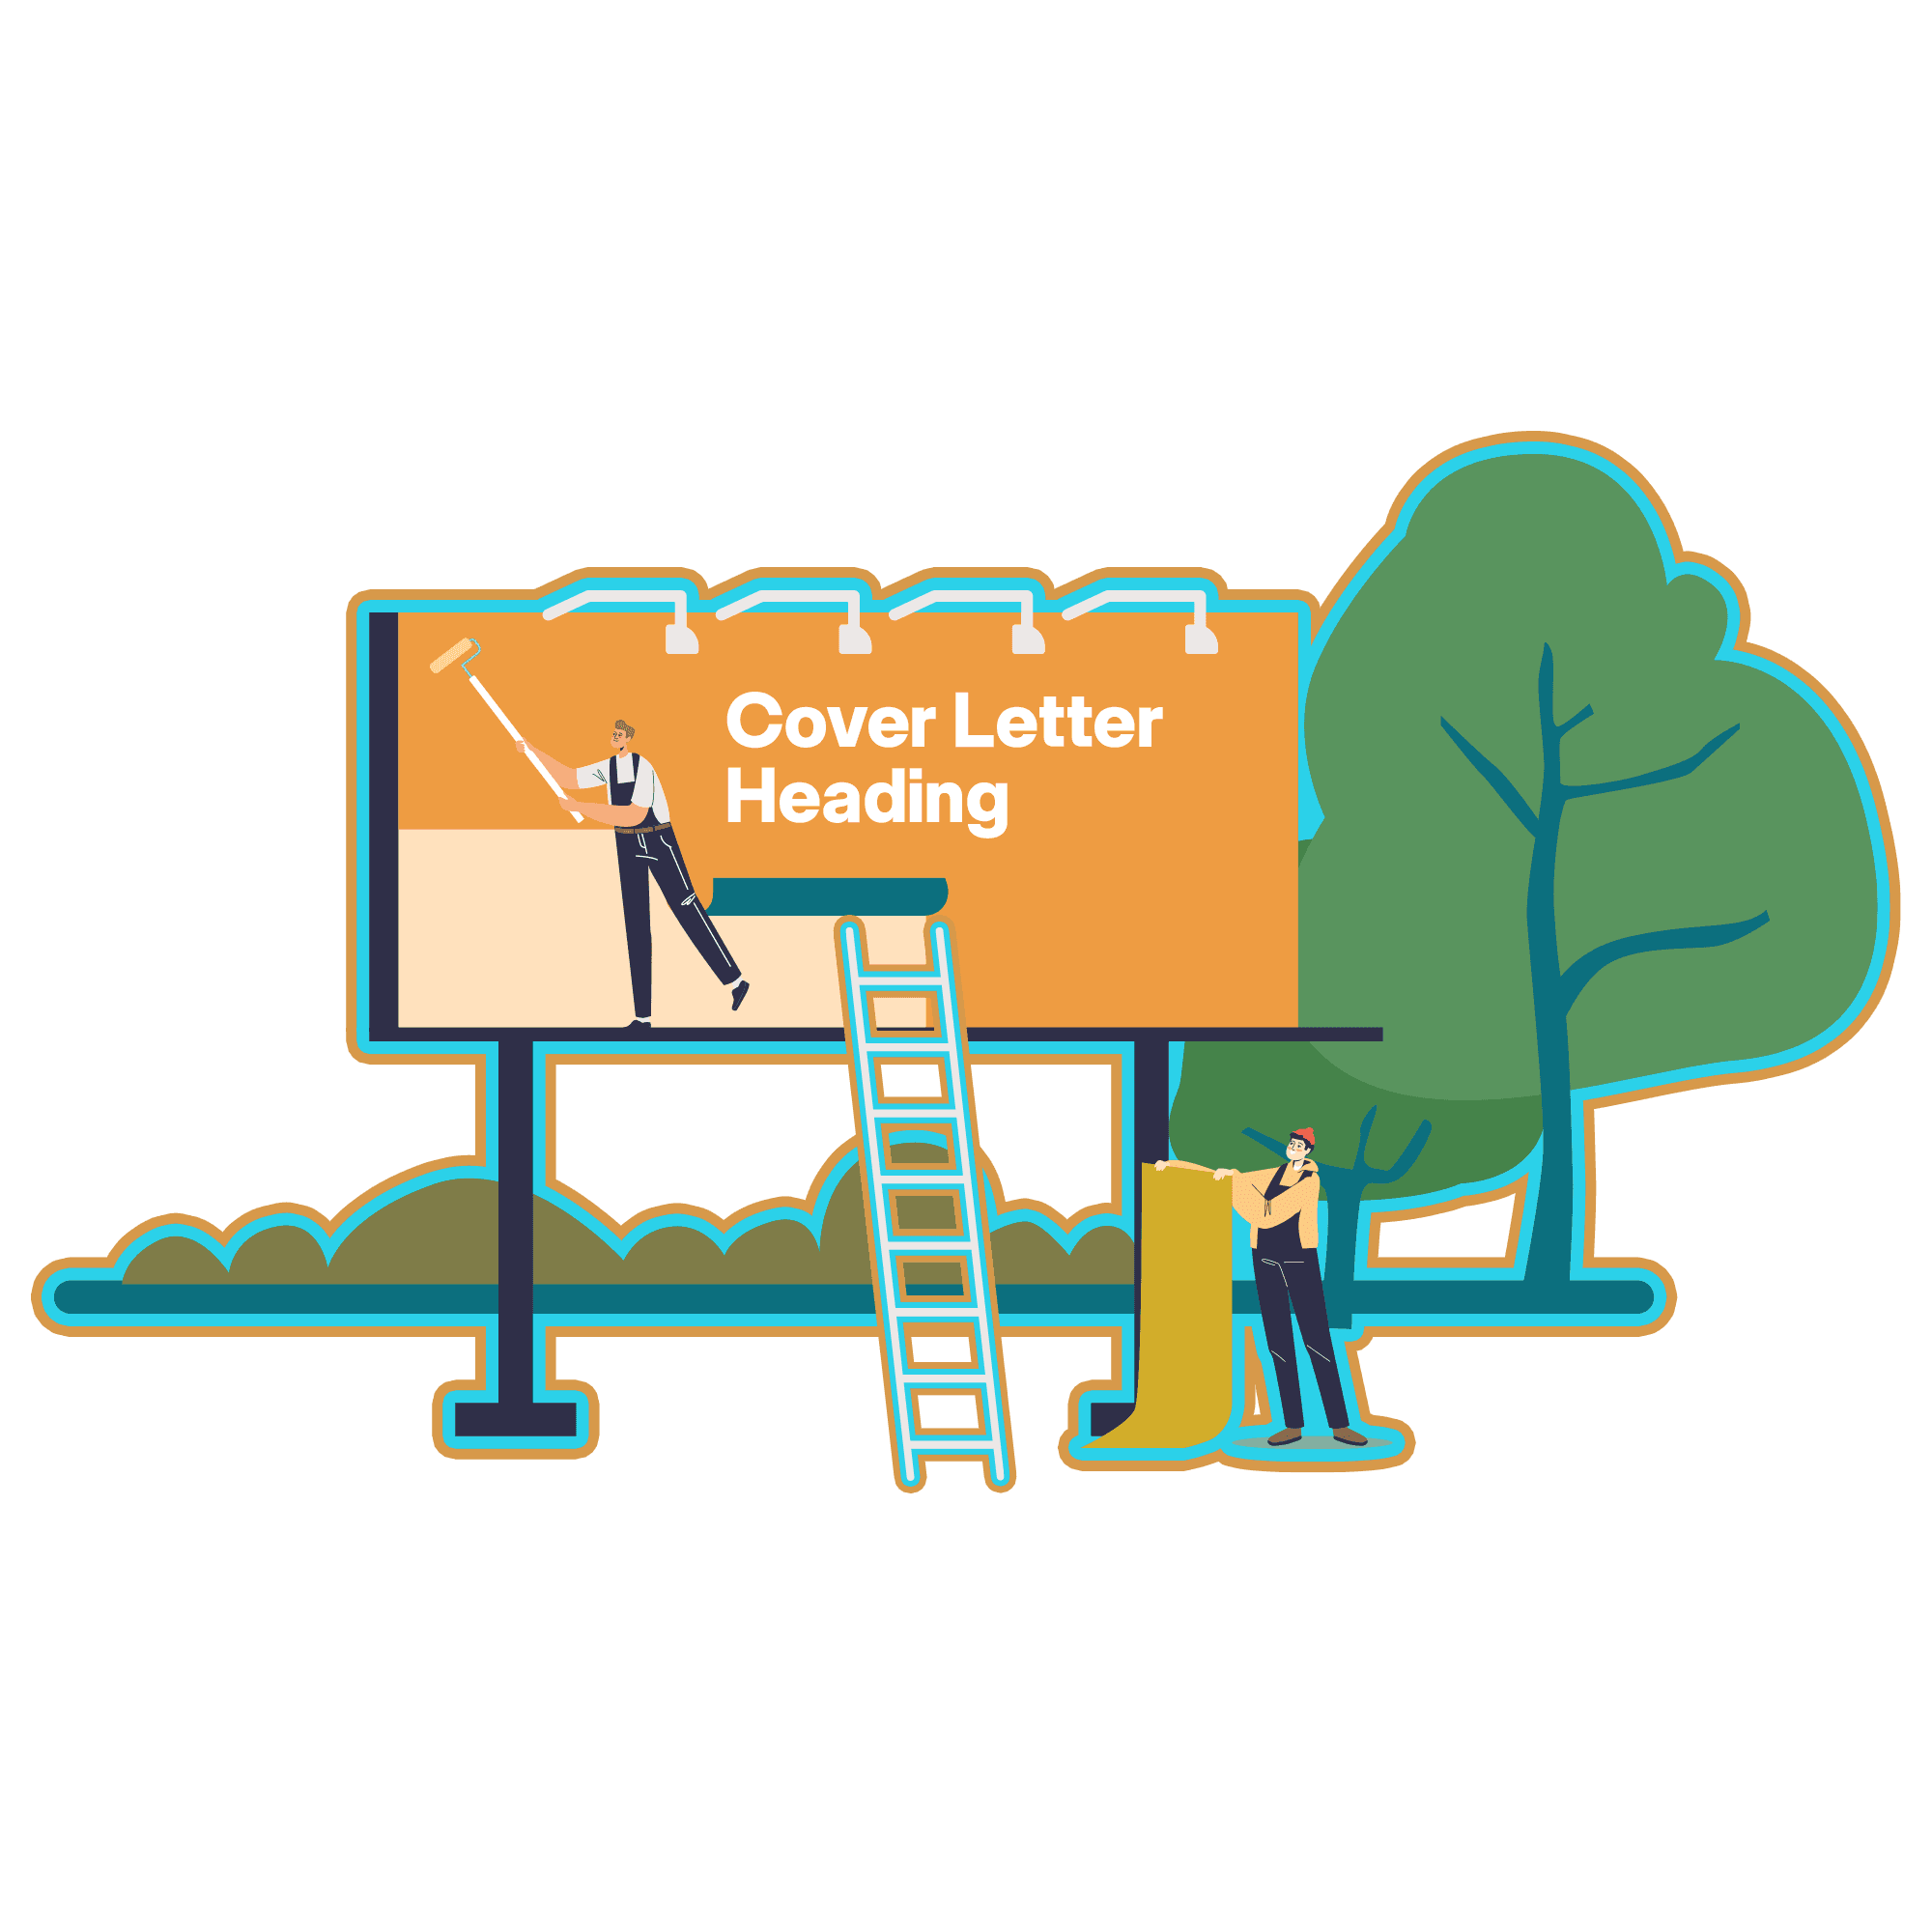 Cover Letter Heading Examples: What to Put in The Header